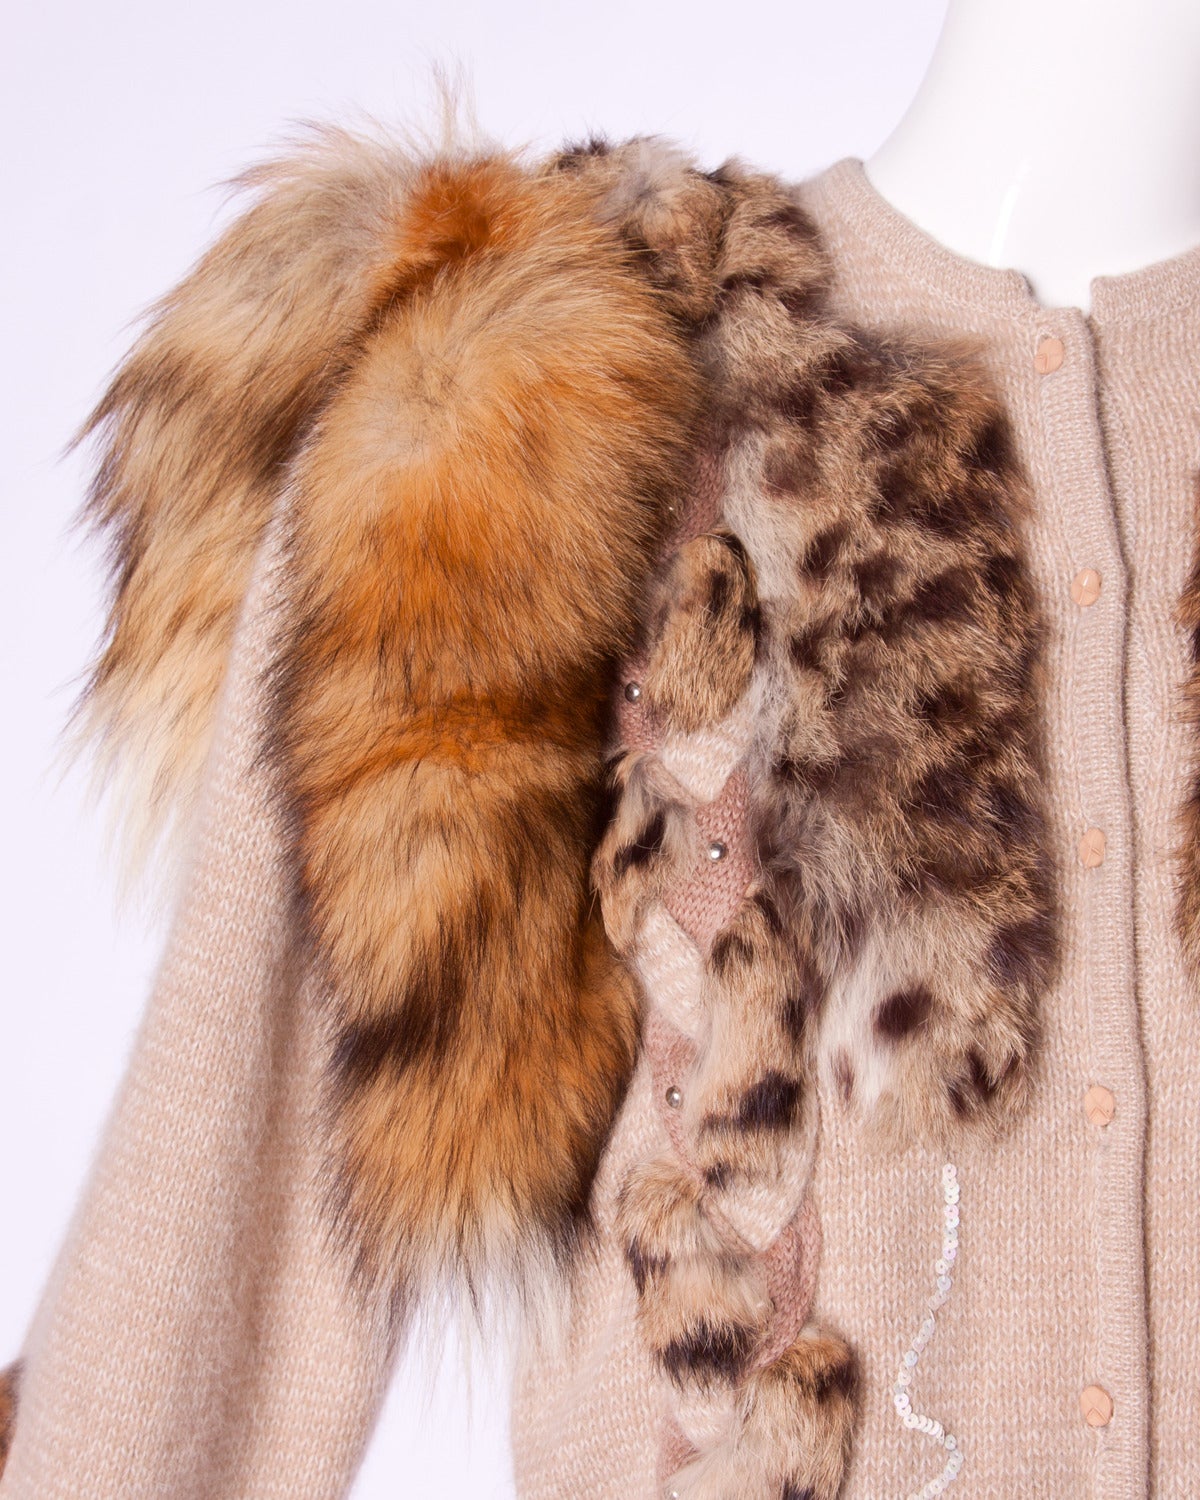 Unworn with the original tags still attached! Vintage soft knit cardigan sweater with fox tails and leopard dyed fur patchwork. 

Details:

Unlined
Front Button Closure
Marked Size: Not Marked
Color: Copper/ Beige/ Cream
Fabric: Angora/